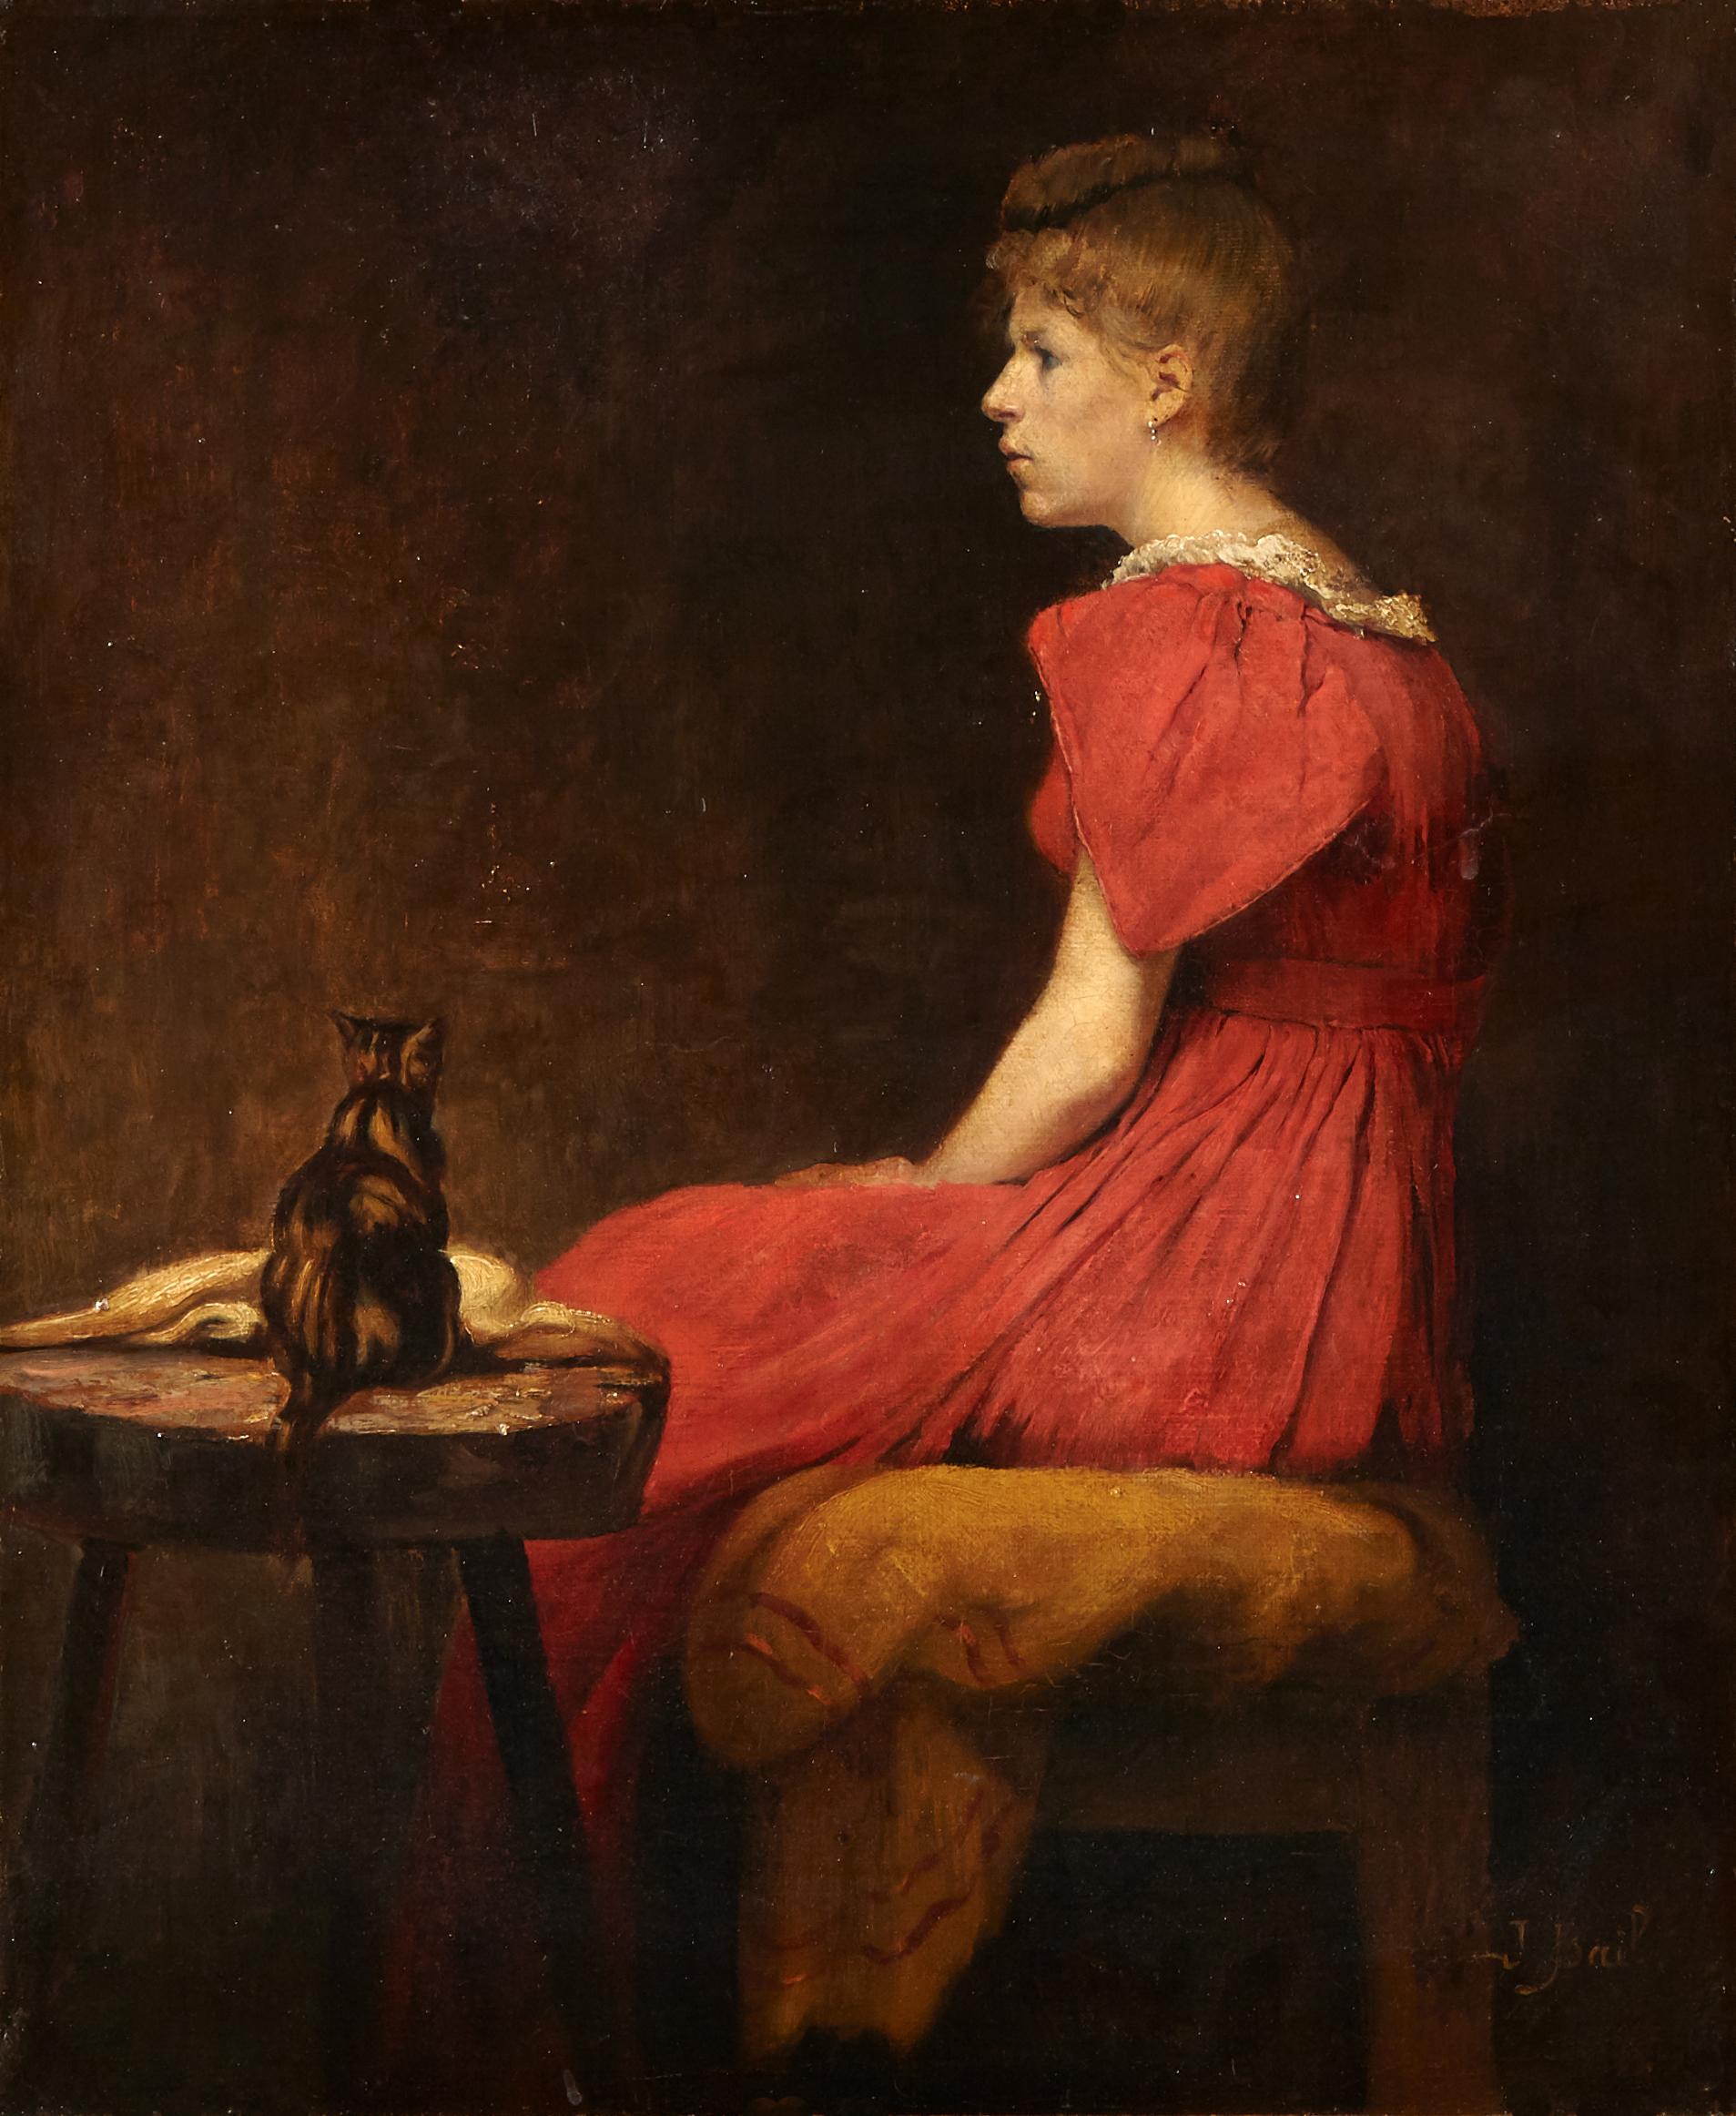 Lady in a red dress with a kitten - Painting by Joseph Bail